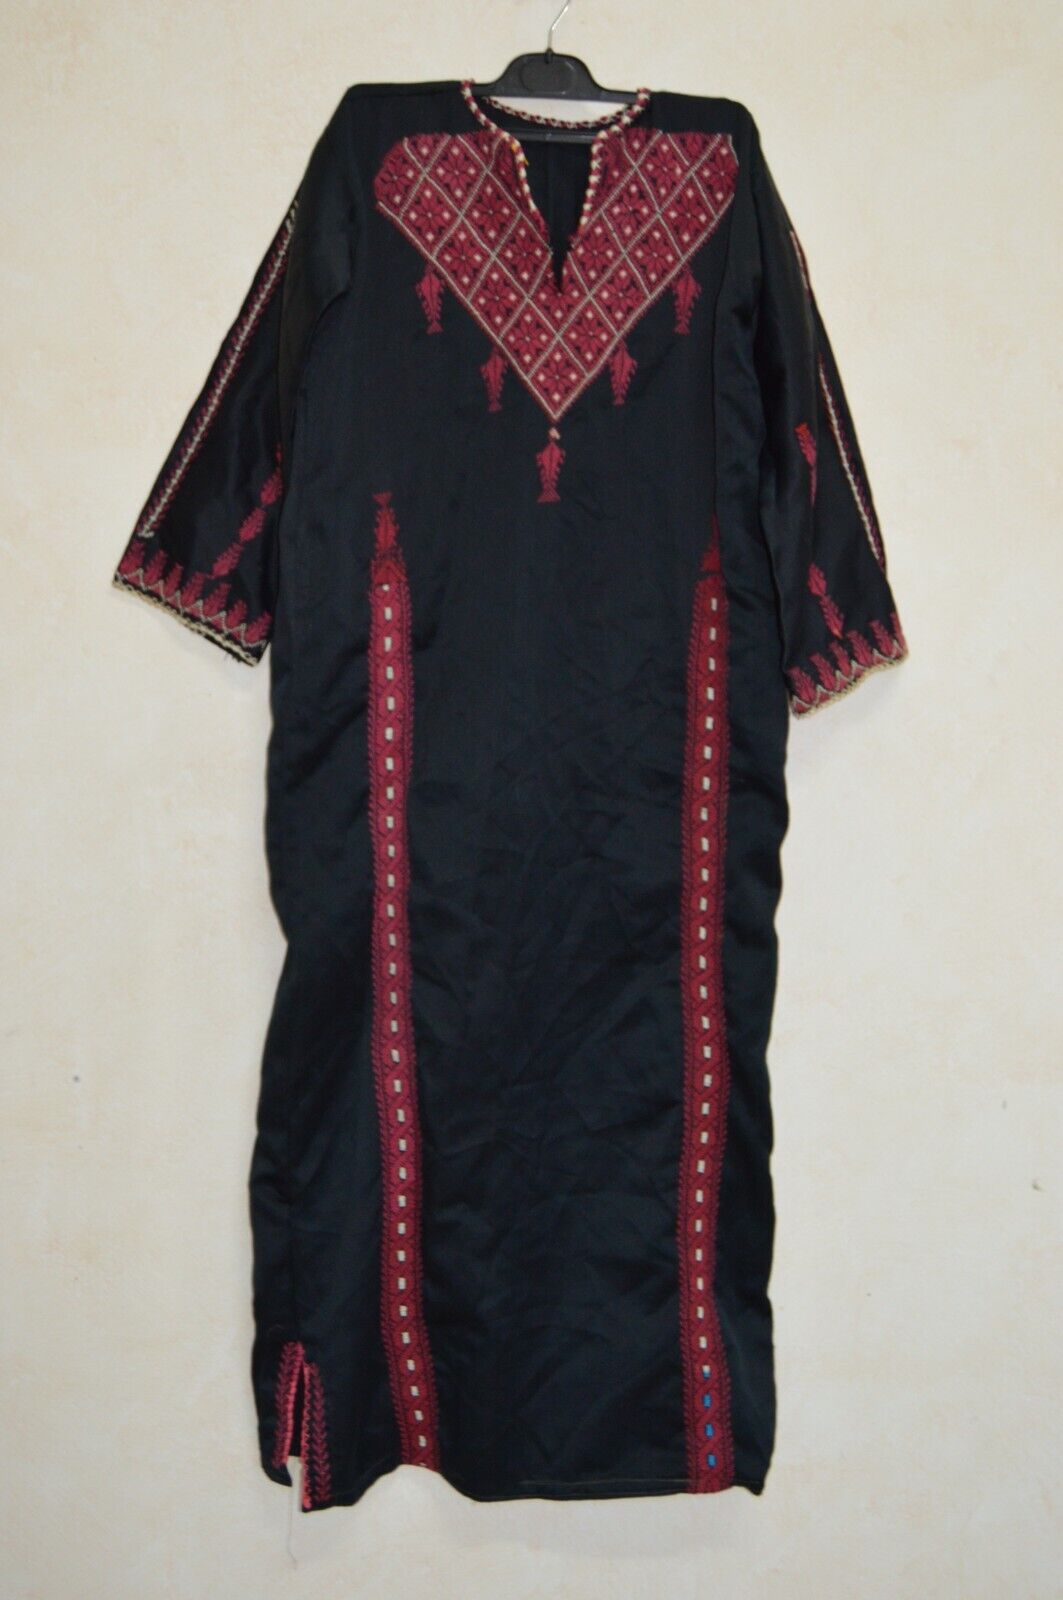 VINTAGE TRADITIONAL PALESTINE PALESTINIAN HAND EMBROIDERY DRESS OLD ETHNIC